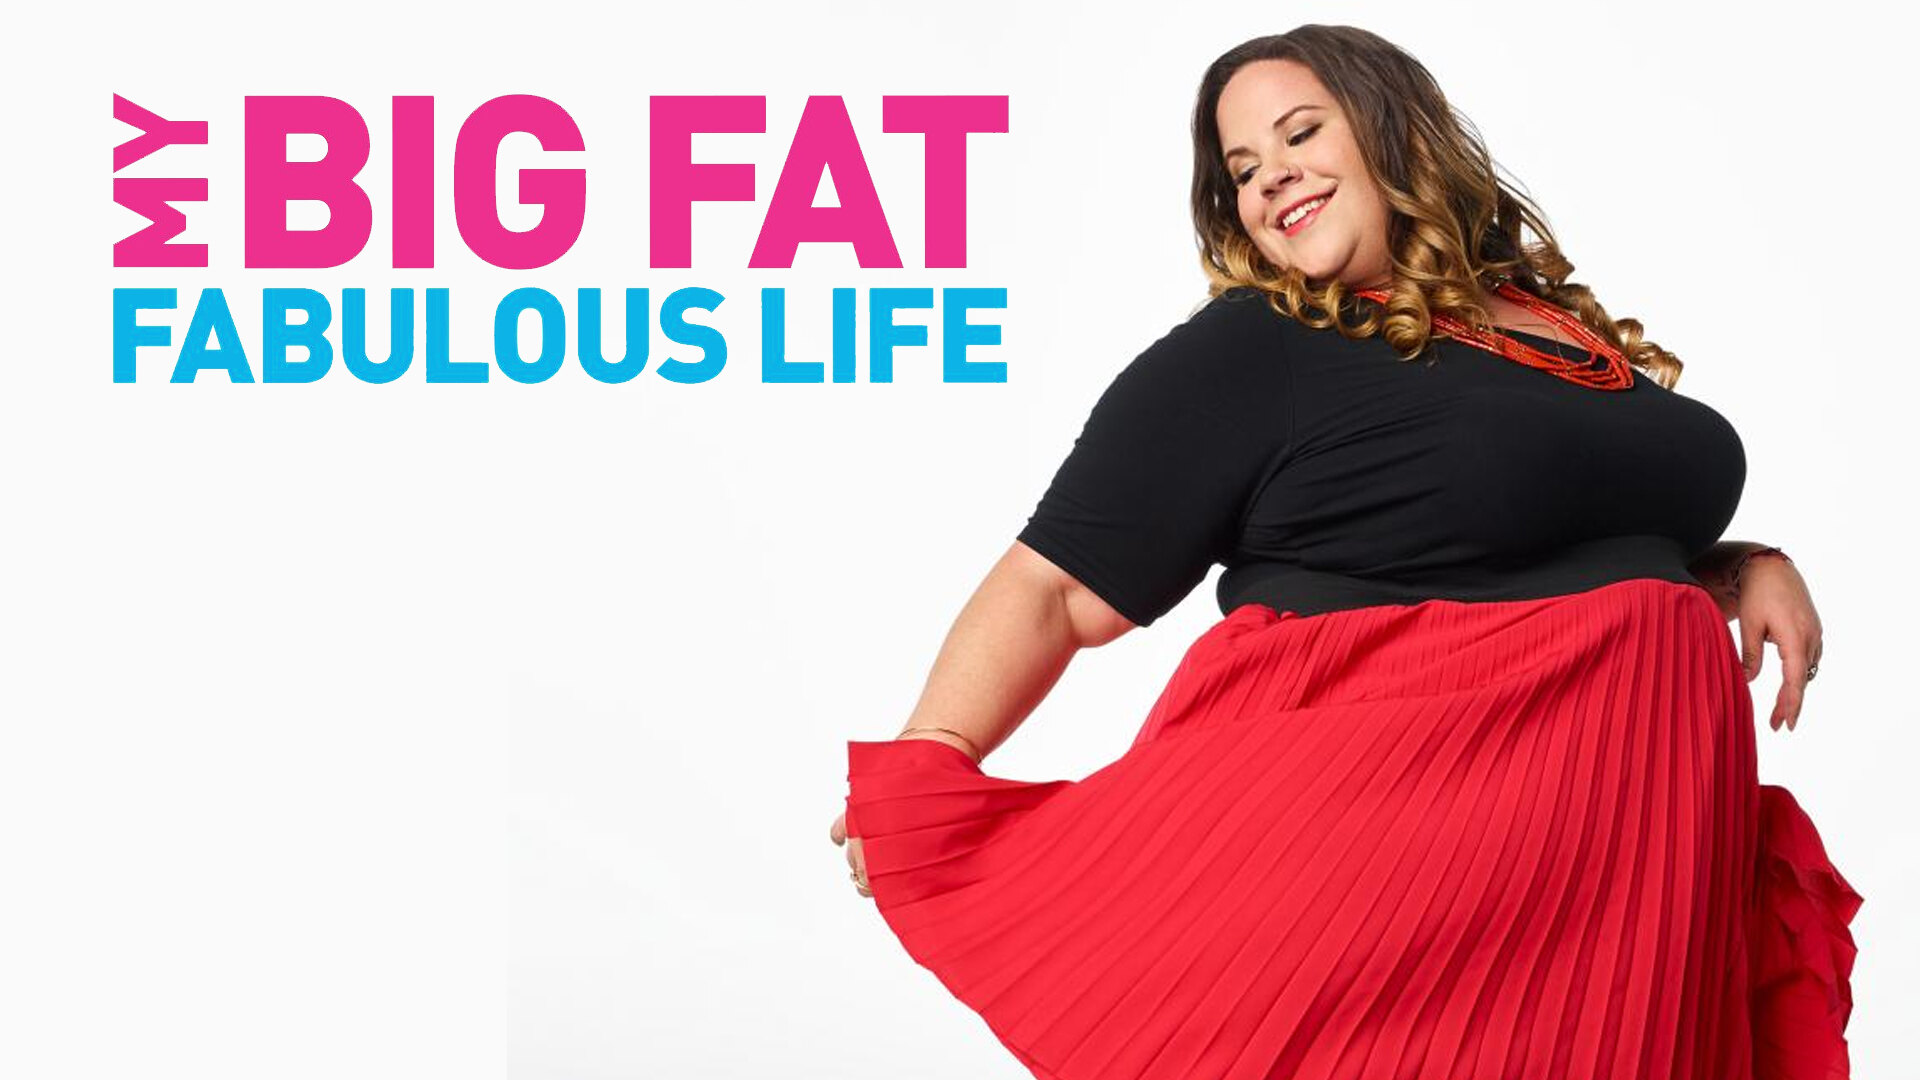 My Big Fat Fabulous Life countdown - how many days until the next episode.